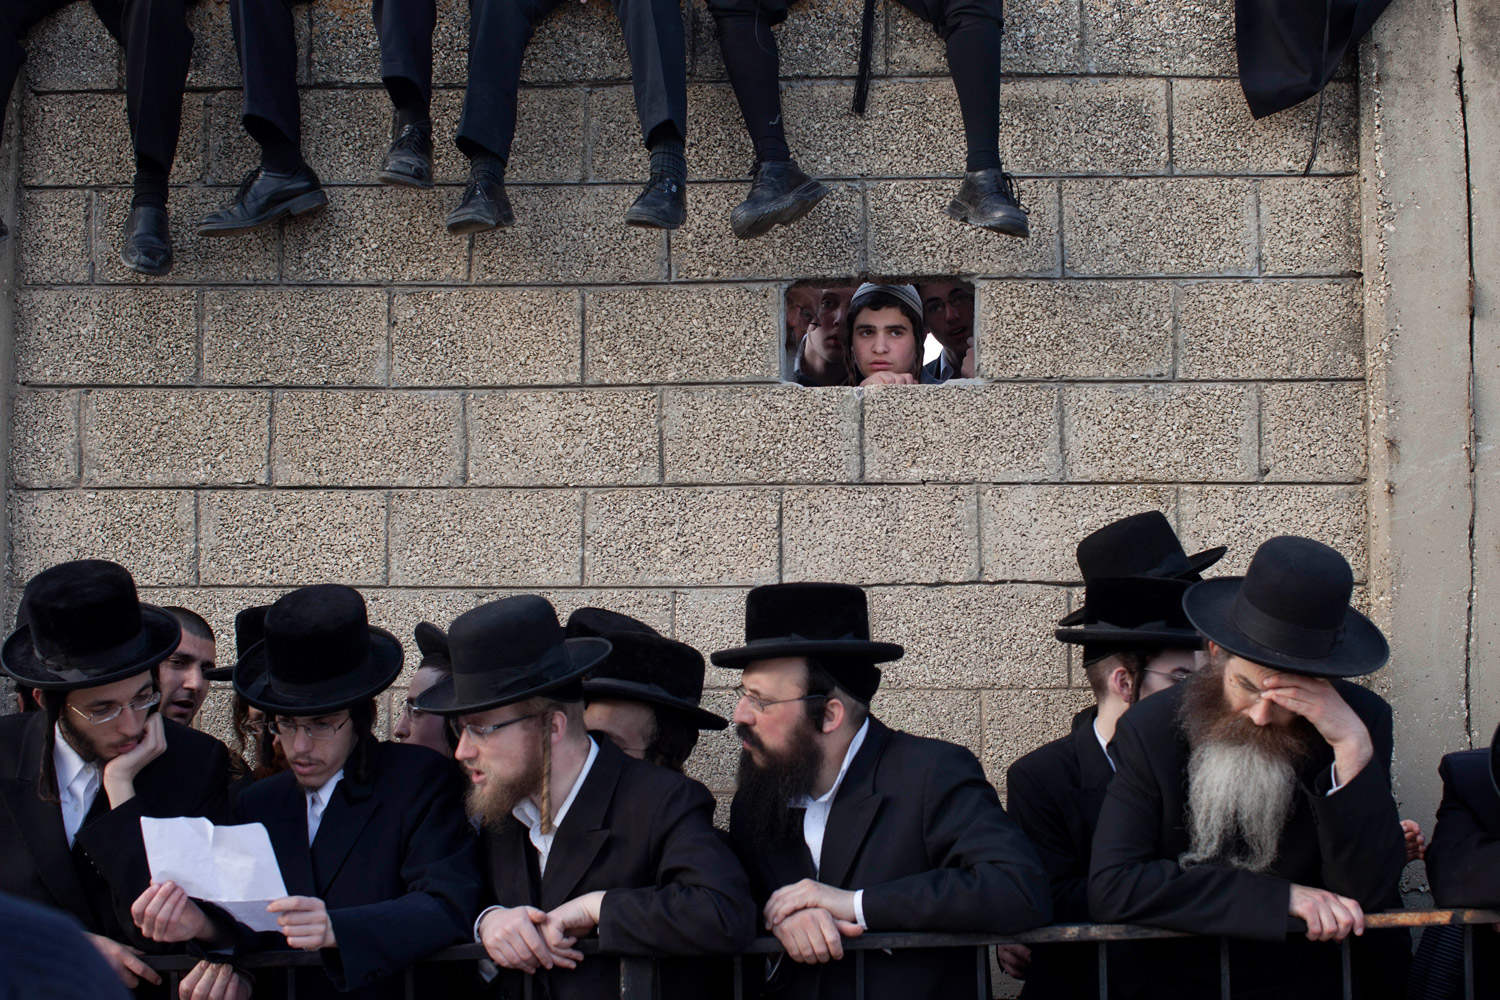 March 14, 2012. Ultra-Orthodox Jews attend the funeral of Rabbi Moshe Yehoshua Hager, leader of the hassidic sect Vizhnitz in Israel, in Bnei Brak, Israel. Rabbi Moshe Yehoshua Hager was 95.